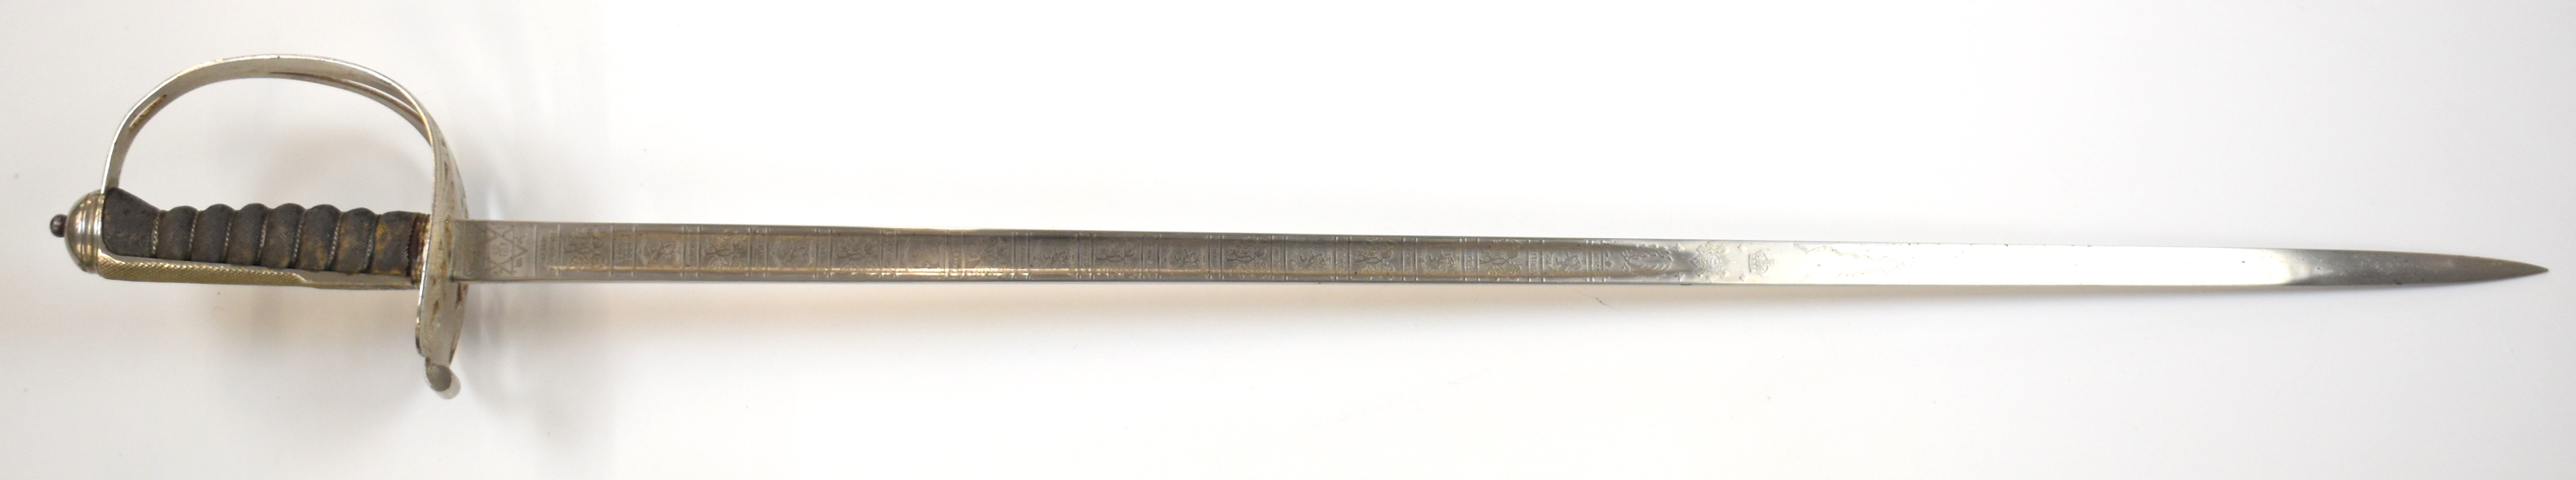 British Army 1854 pattern Scots Guard Foot Guards officer's sword by Wilkinson, number 72148, the - Image 4 of 16